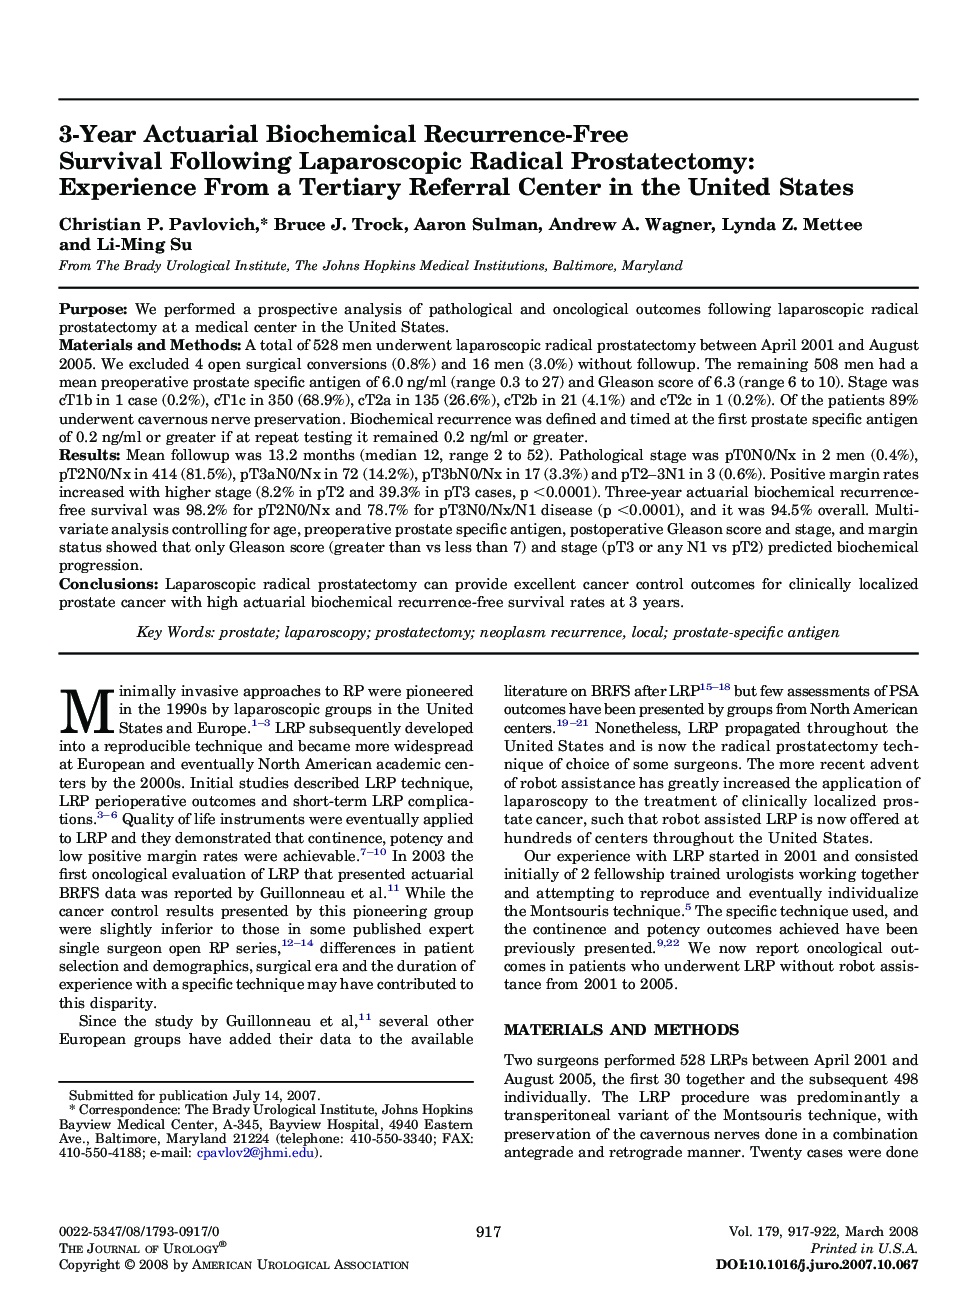 3-Year Actuarial Biochemical Recurrence-Free Survival Following Laparoscopic Radical Prostatectomy: Experience From a Tertiary Referral Center in the United States